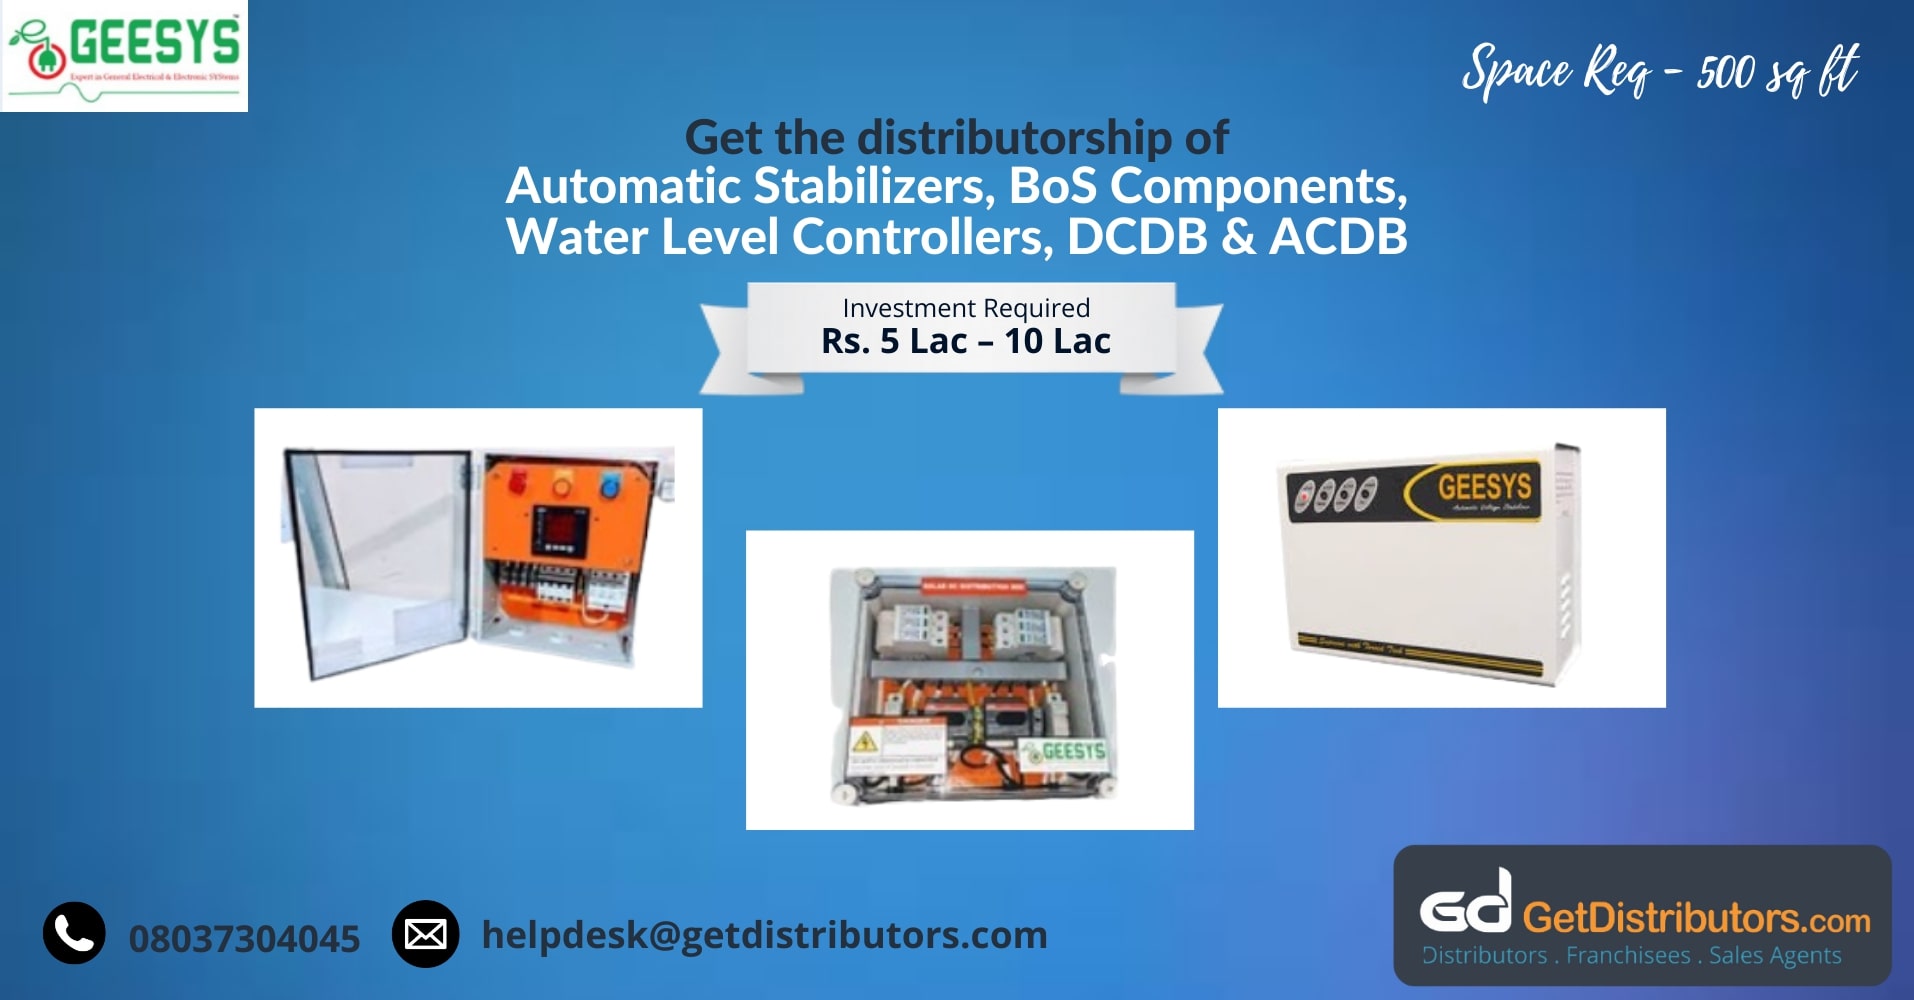 Distributorship of electrical high utility, safety & power saving products